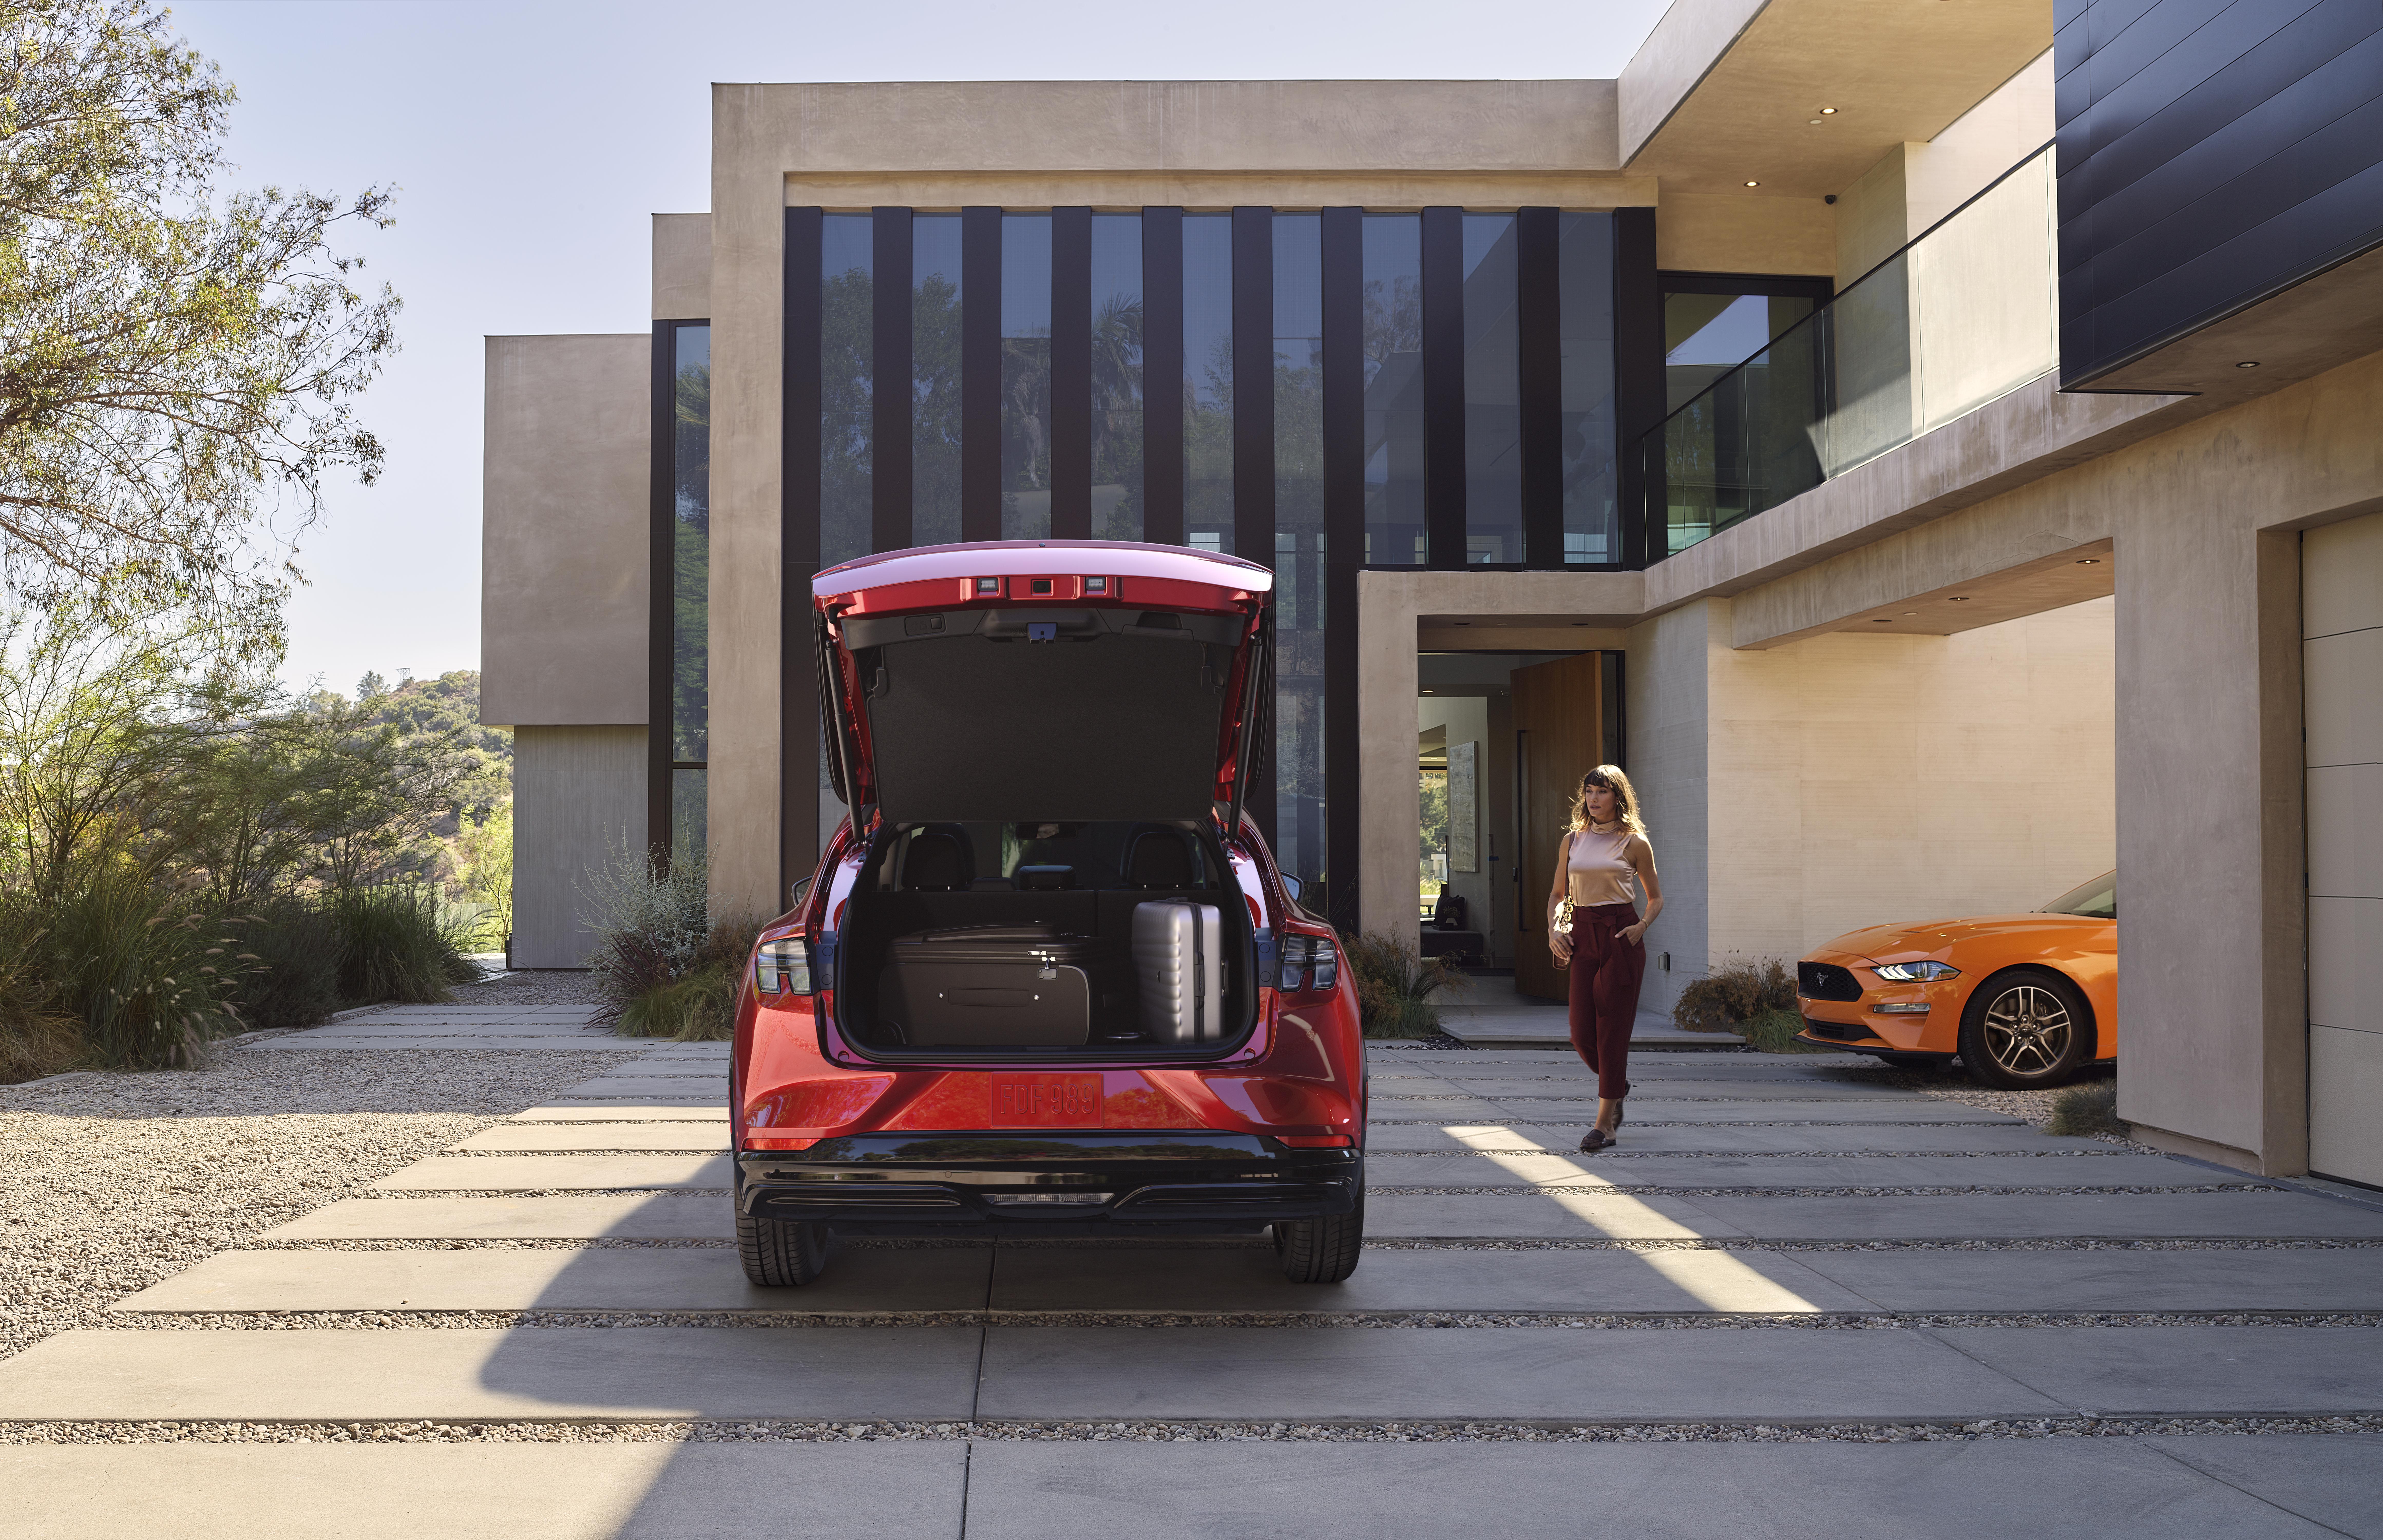 In addition to the exterior front trunk, the rear trunk is outfitted with 29 cubic feet of space. With the back seats down, the Mustang Mach-E boasts 59.6 cubic feet of space – more than enough room for luggage, camping gear or whatever else you may want to move around.